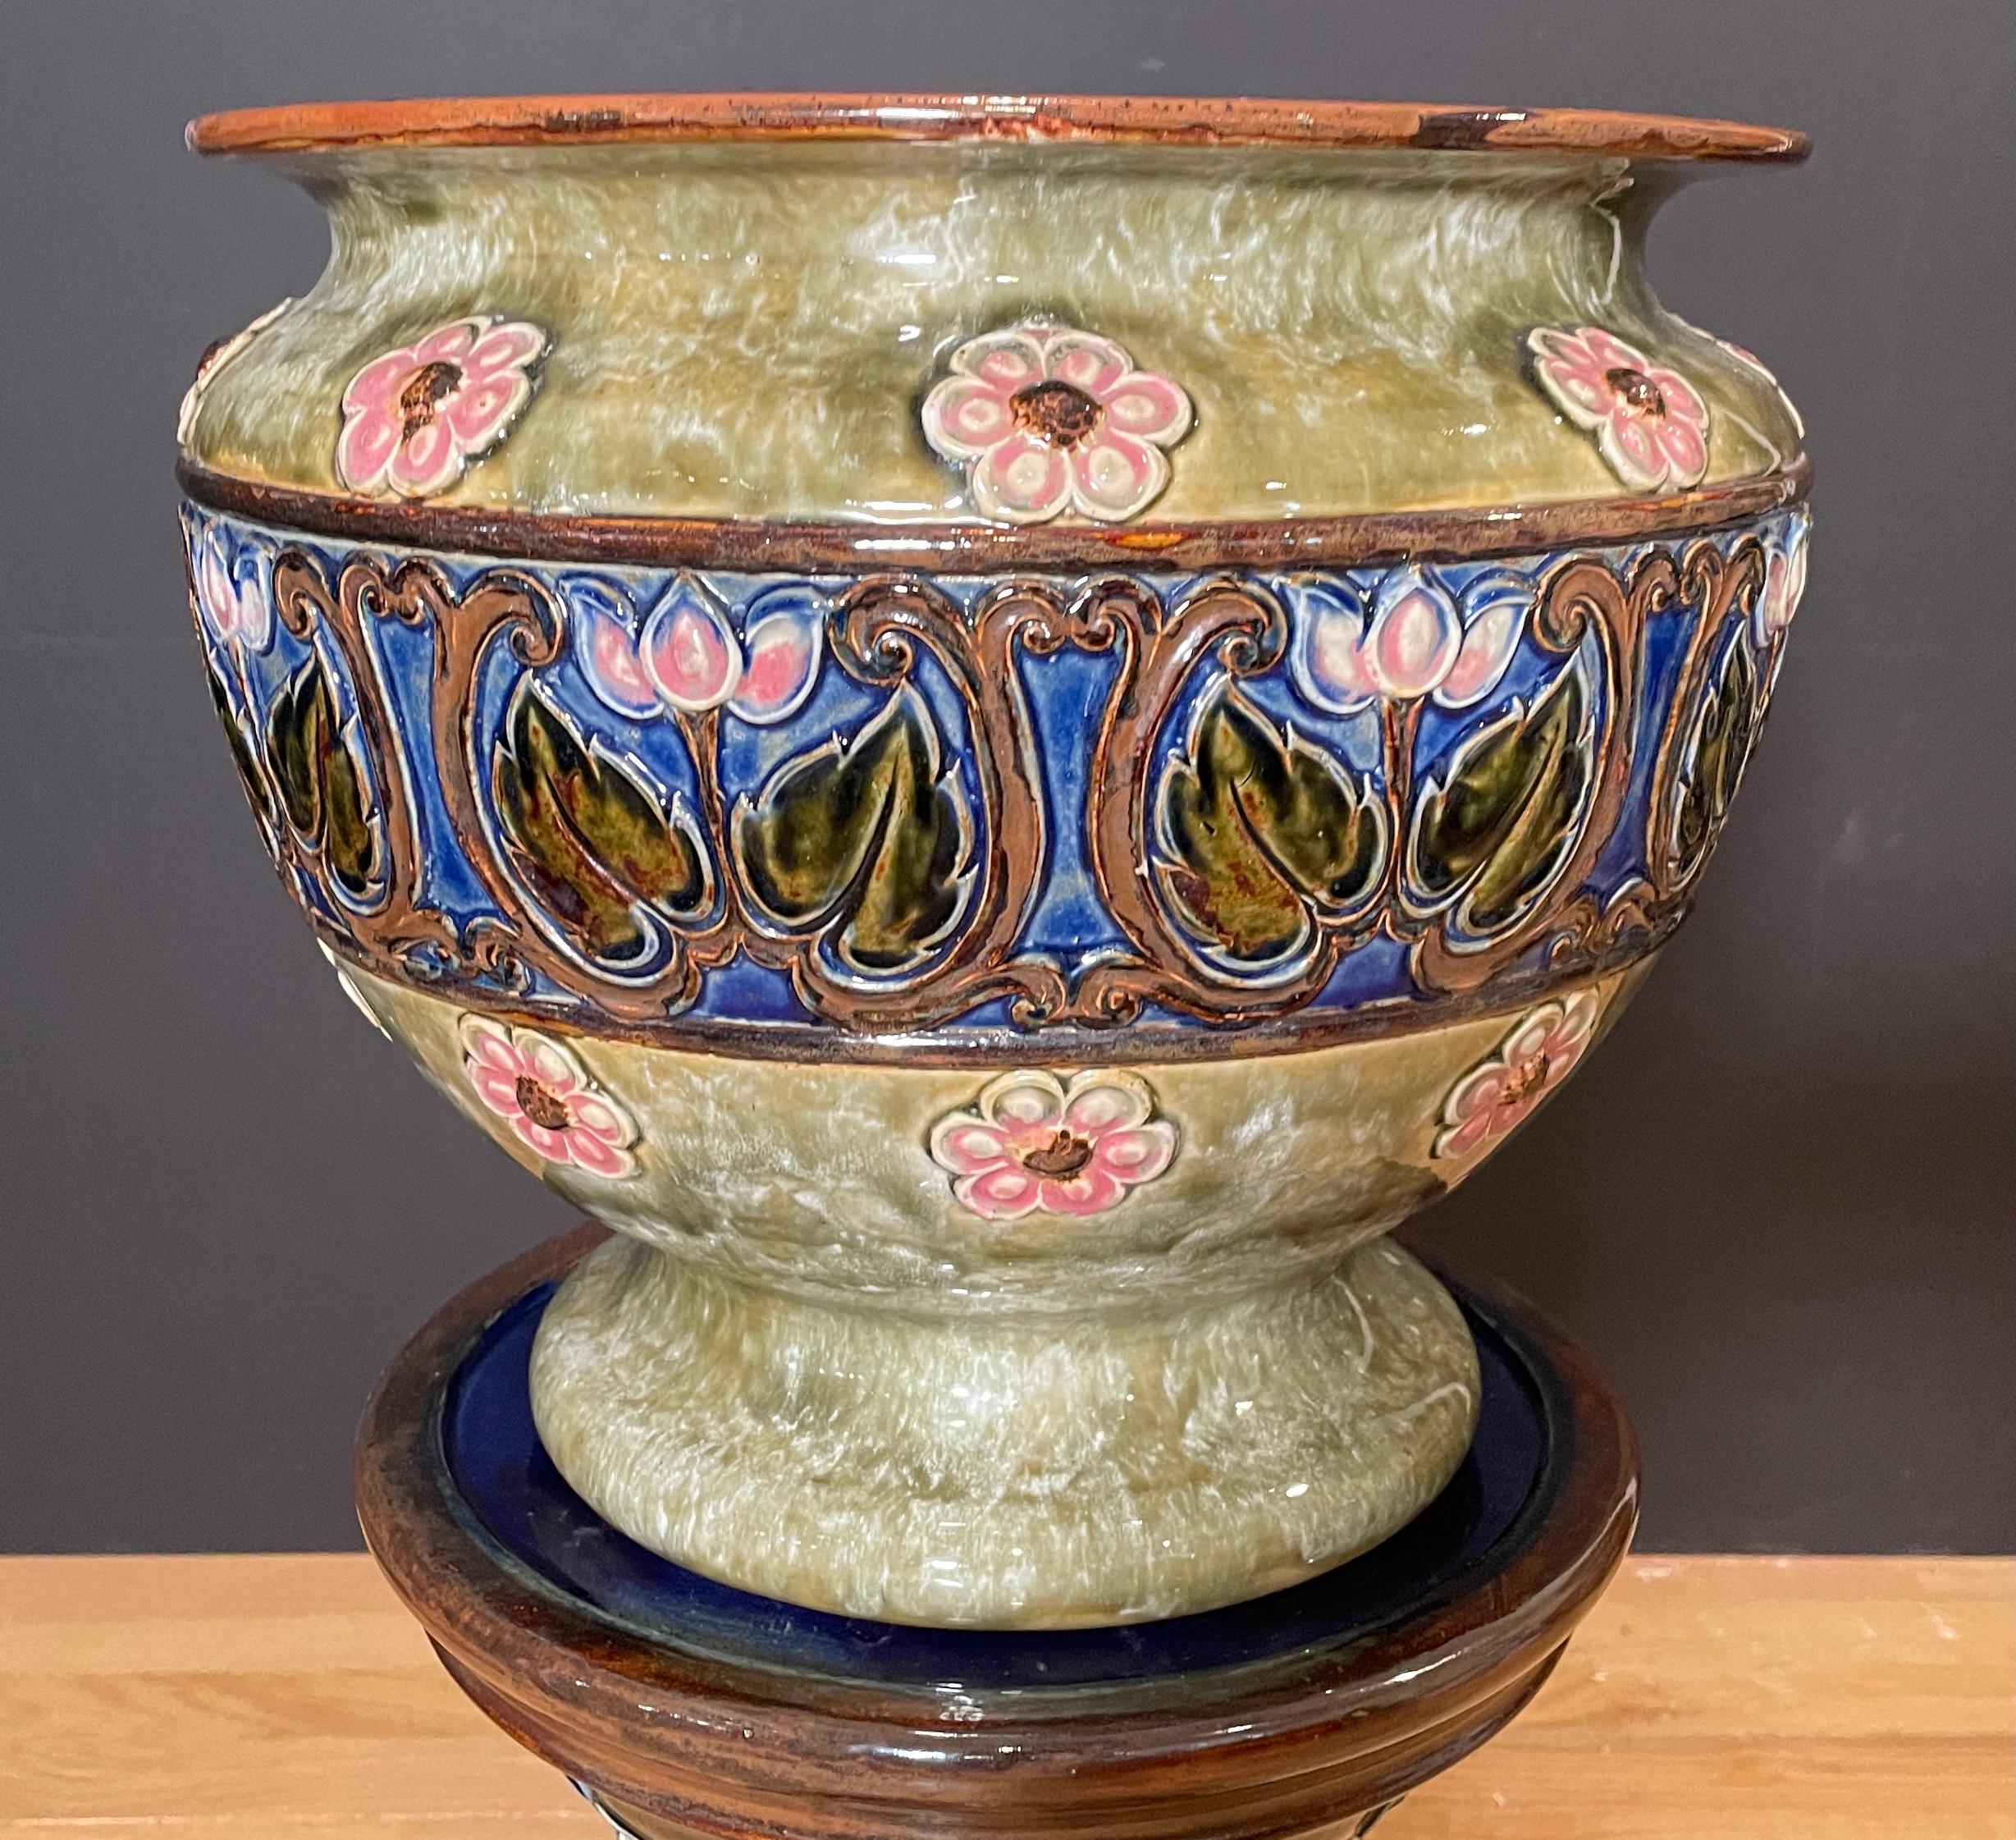 Art Deco Royal Doulton fully marked jardinière on stand. Dark cobalt blue with green and brown ground and pink flowers. Planter on stand from the early 20th century.
Planter opening 11.5